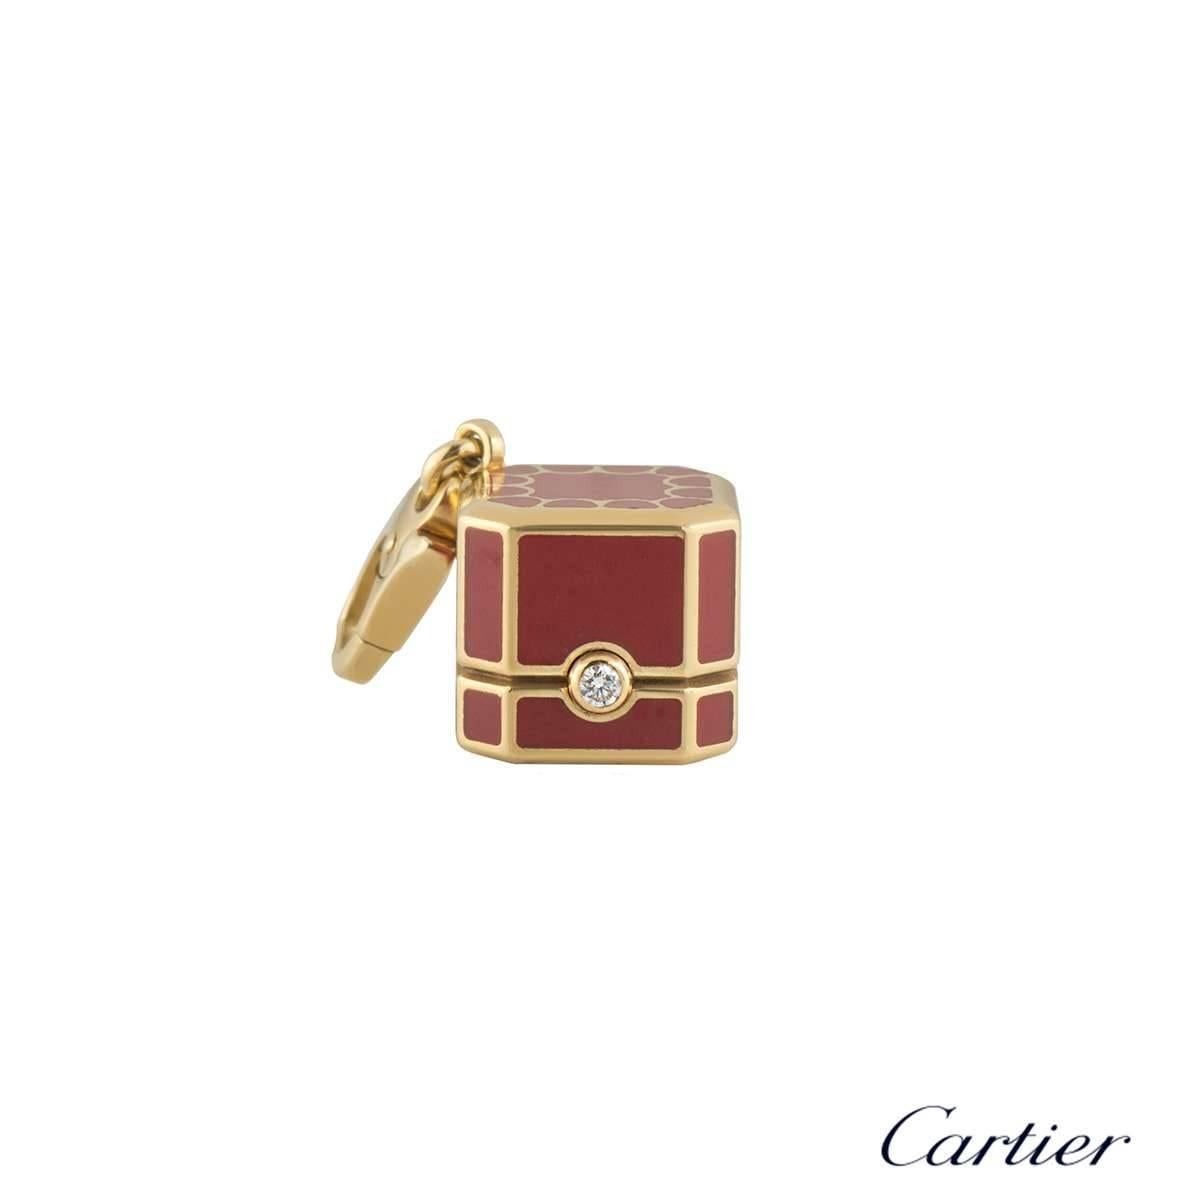 A unique red box charm by Cartier. The charm is a miniature Cartier presentation box with a red lacquer coating and yellow gold detailing. The charm has a single round brilliant cut diamond weighing approximately 0.03ct. The charm is 2.5cm in